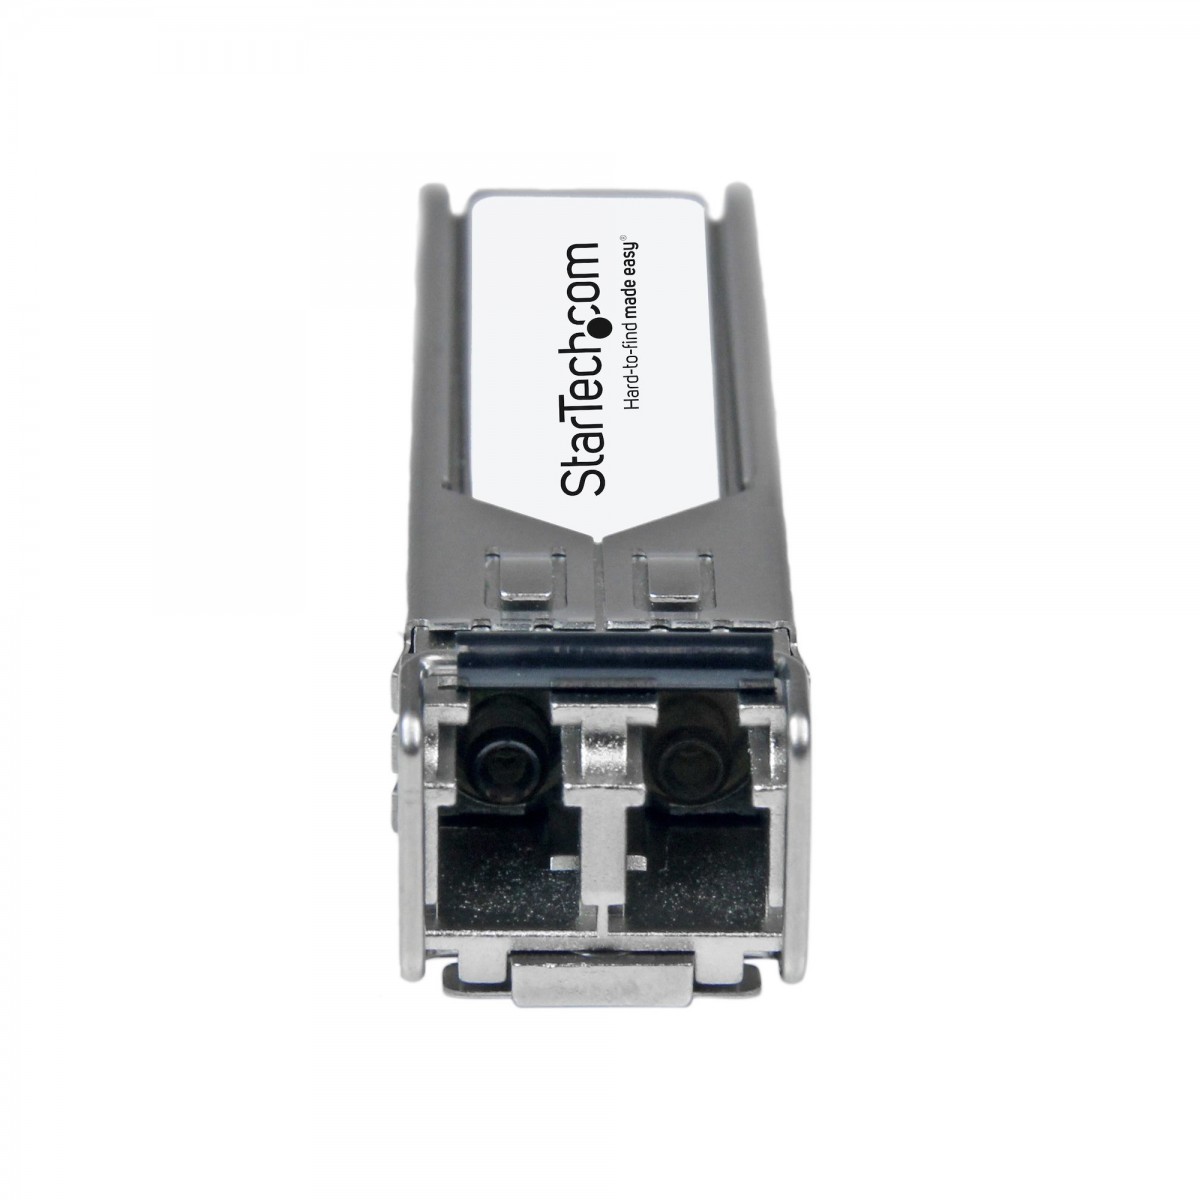 StarTech.com Extreme Networks 10303 Compatible SFP+ Module - 10GBASE-LRM - 10GbE Multimode Fiber MMF Optic Transceiver - 10GE Gi